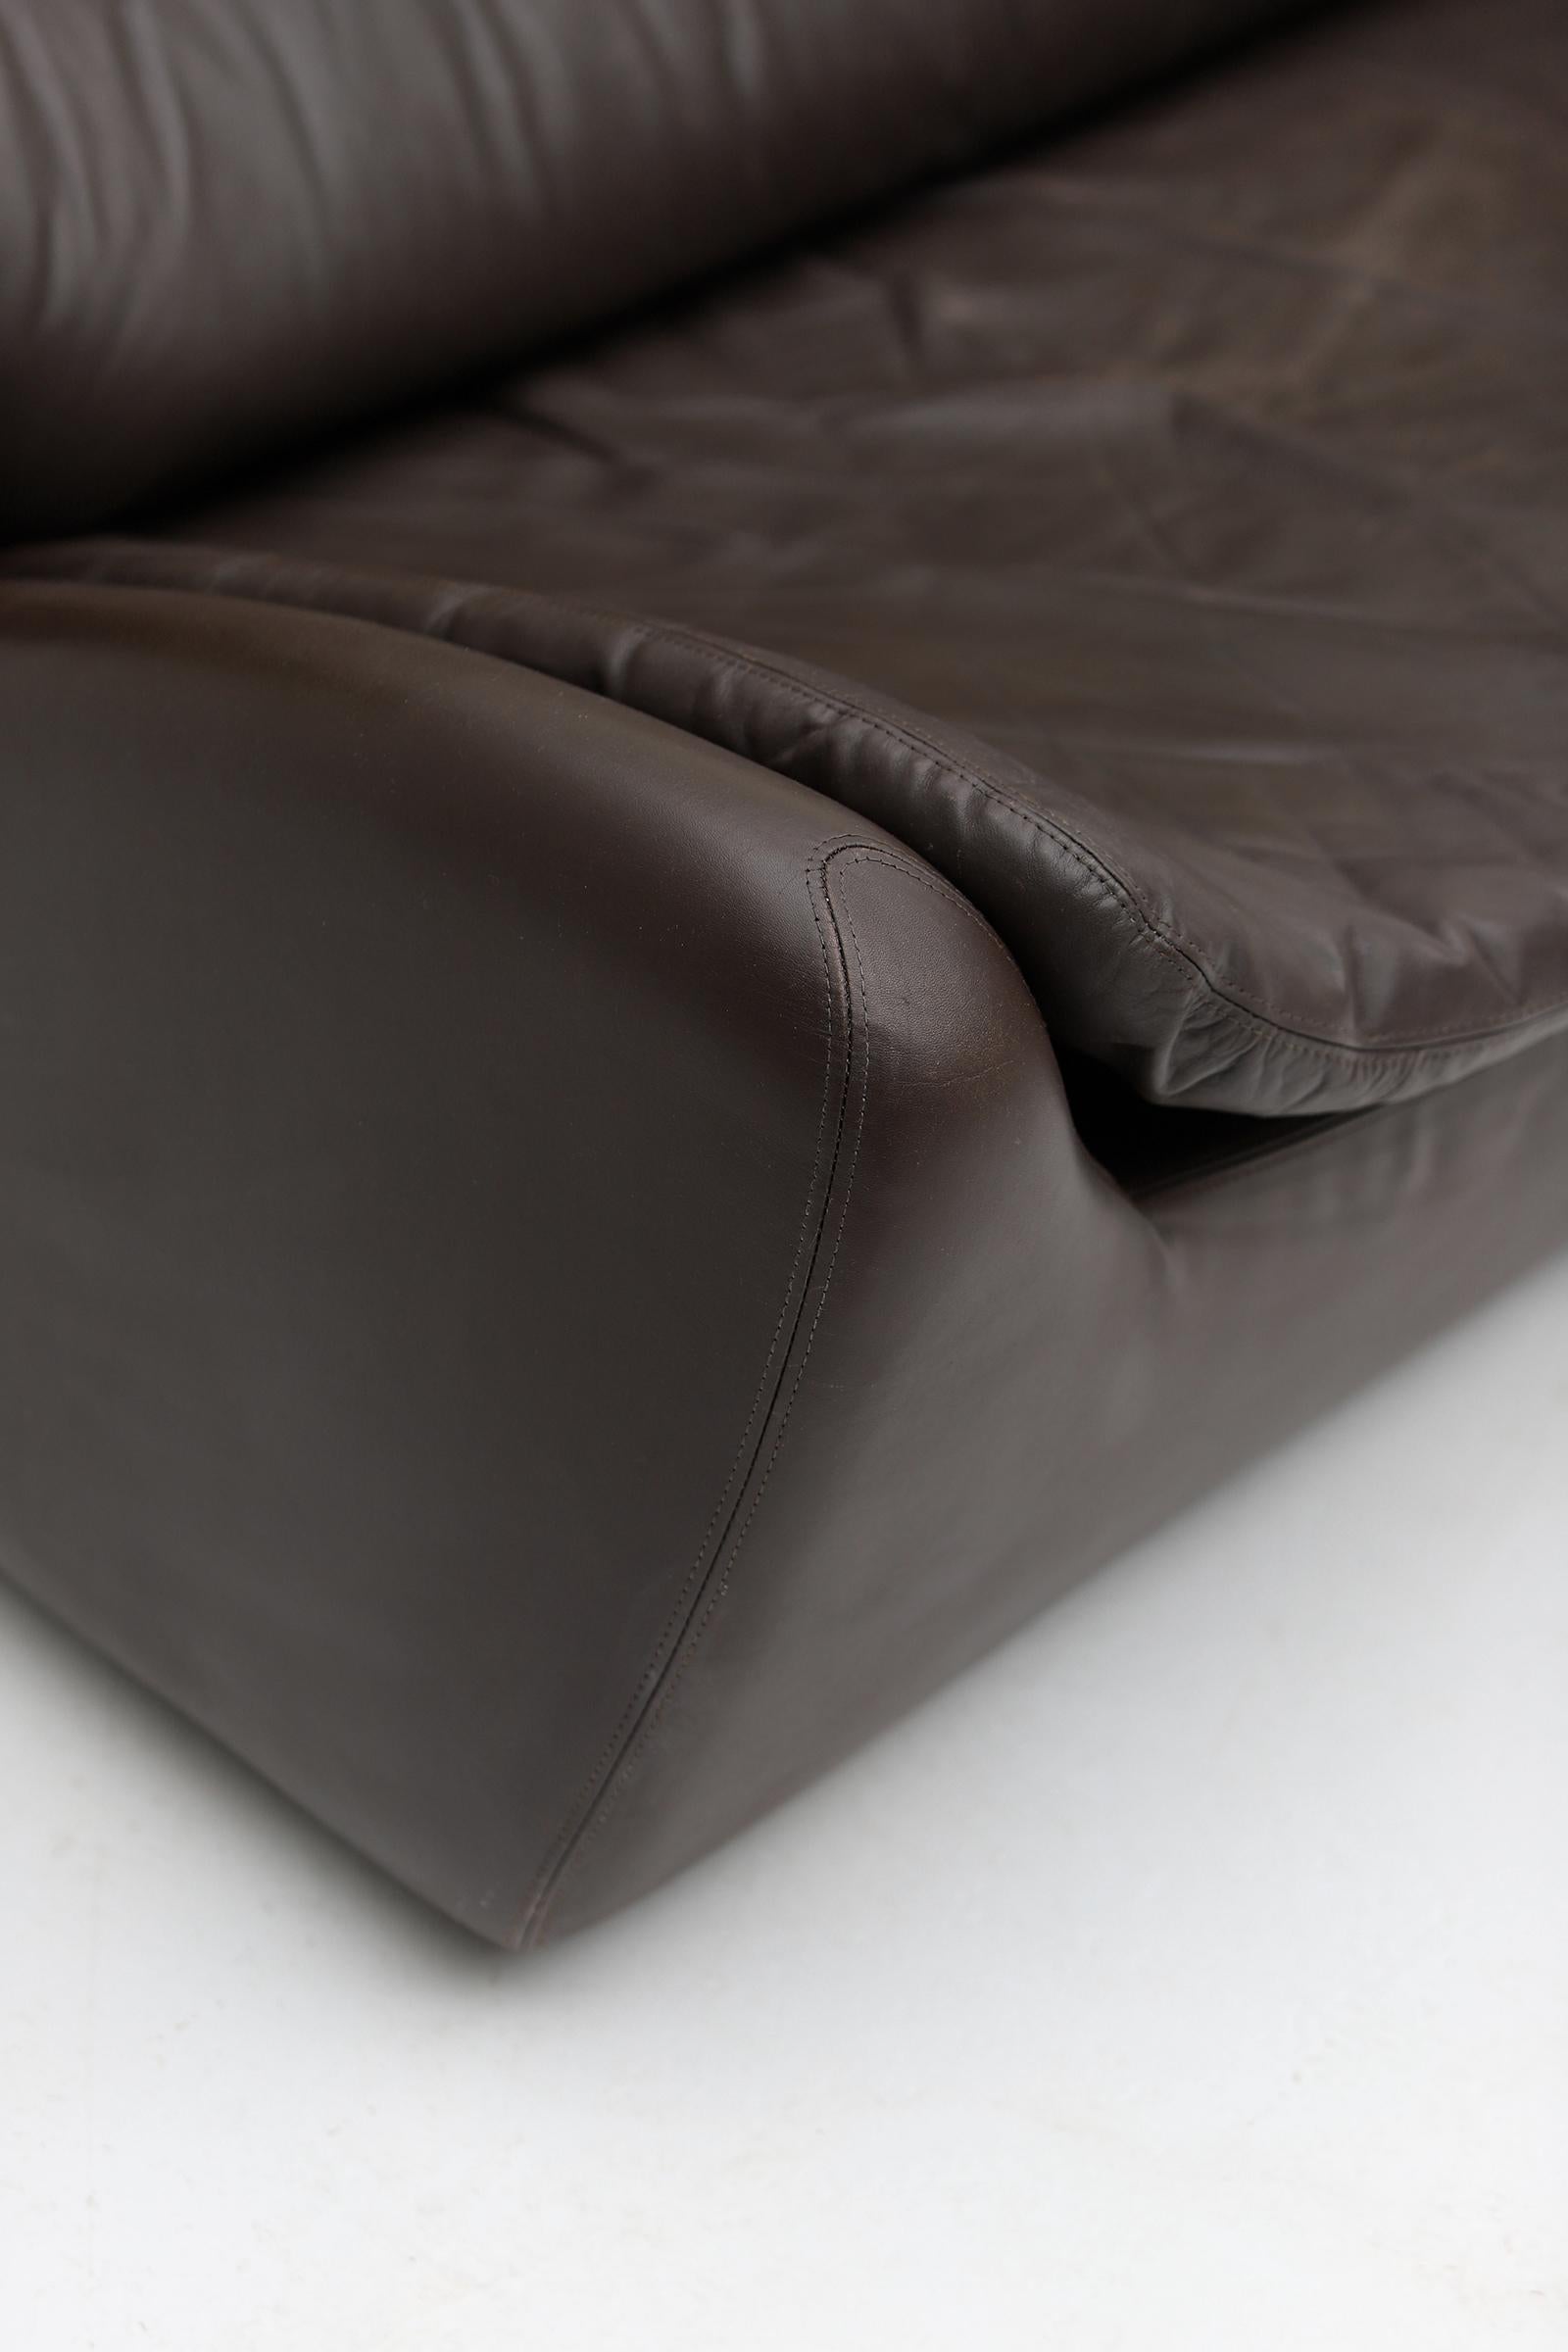 Late 19th Century Space Age Modern Chocolate Brown Leather Sofa 'Pasha' by Durlet, Belgium, 1970s For Sale